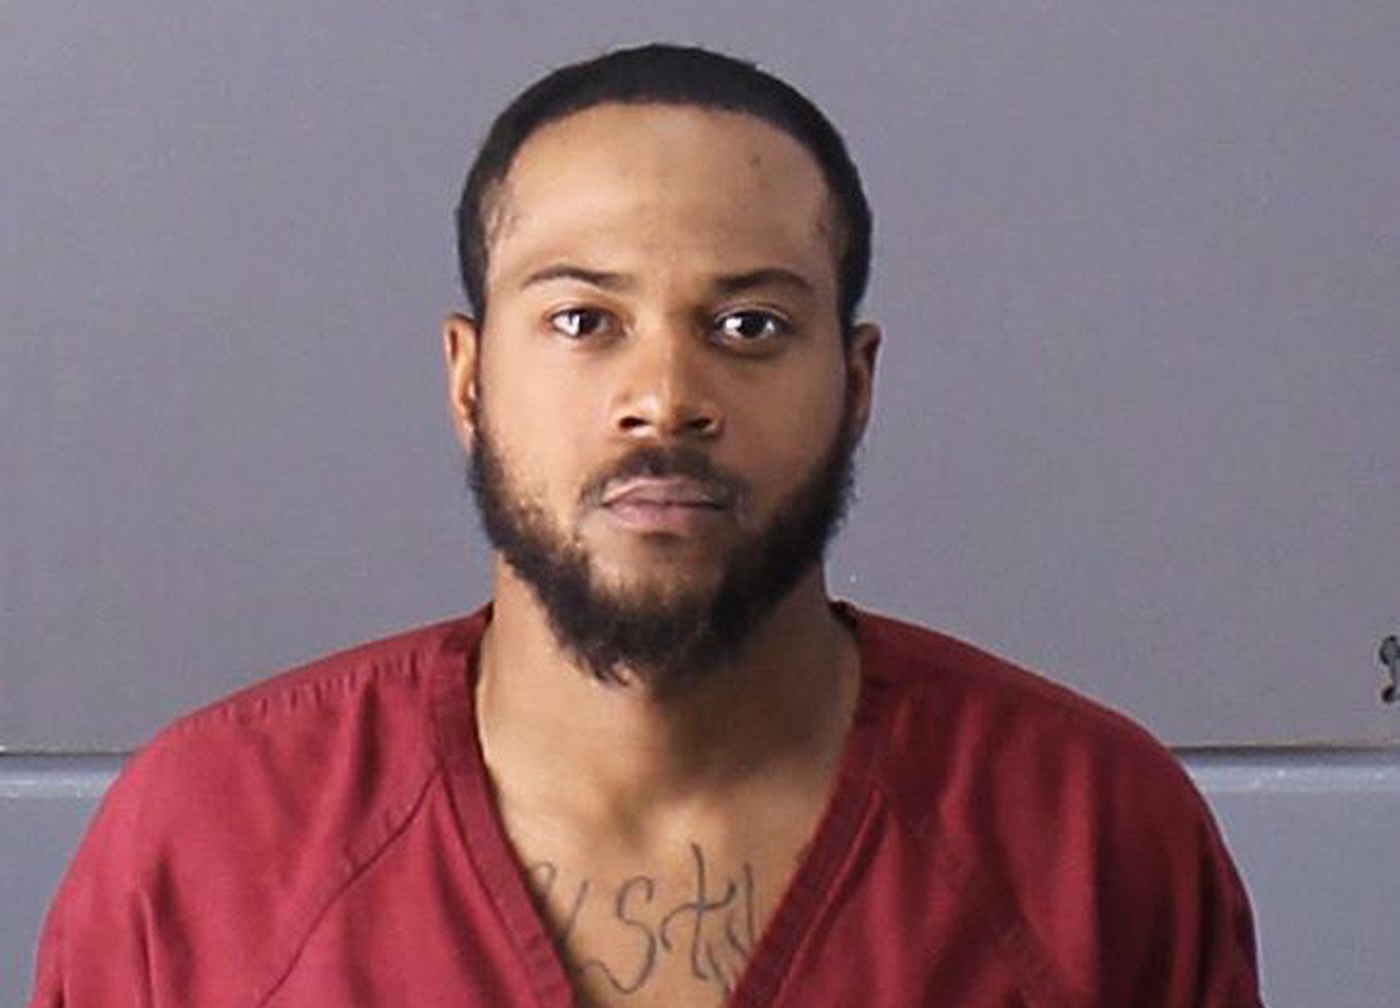 Suspect charged with capital murder in slaying of brother of NFL player